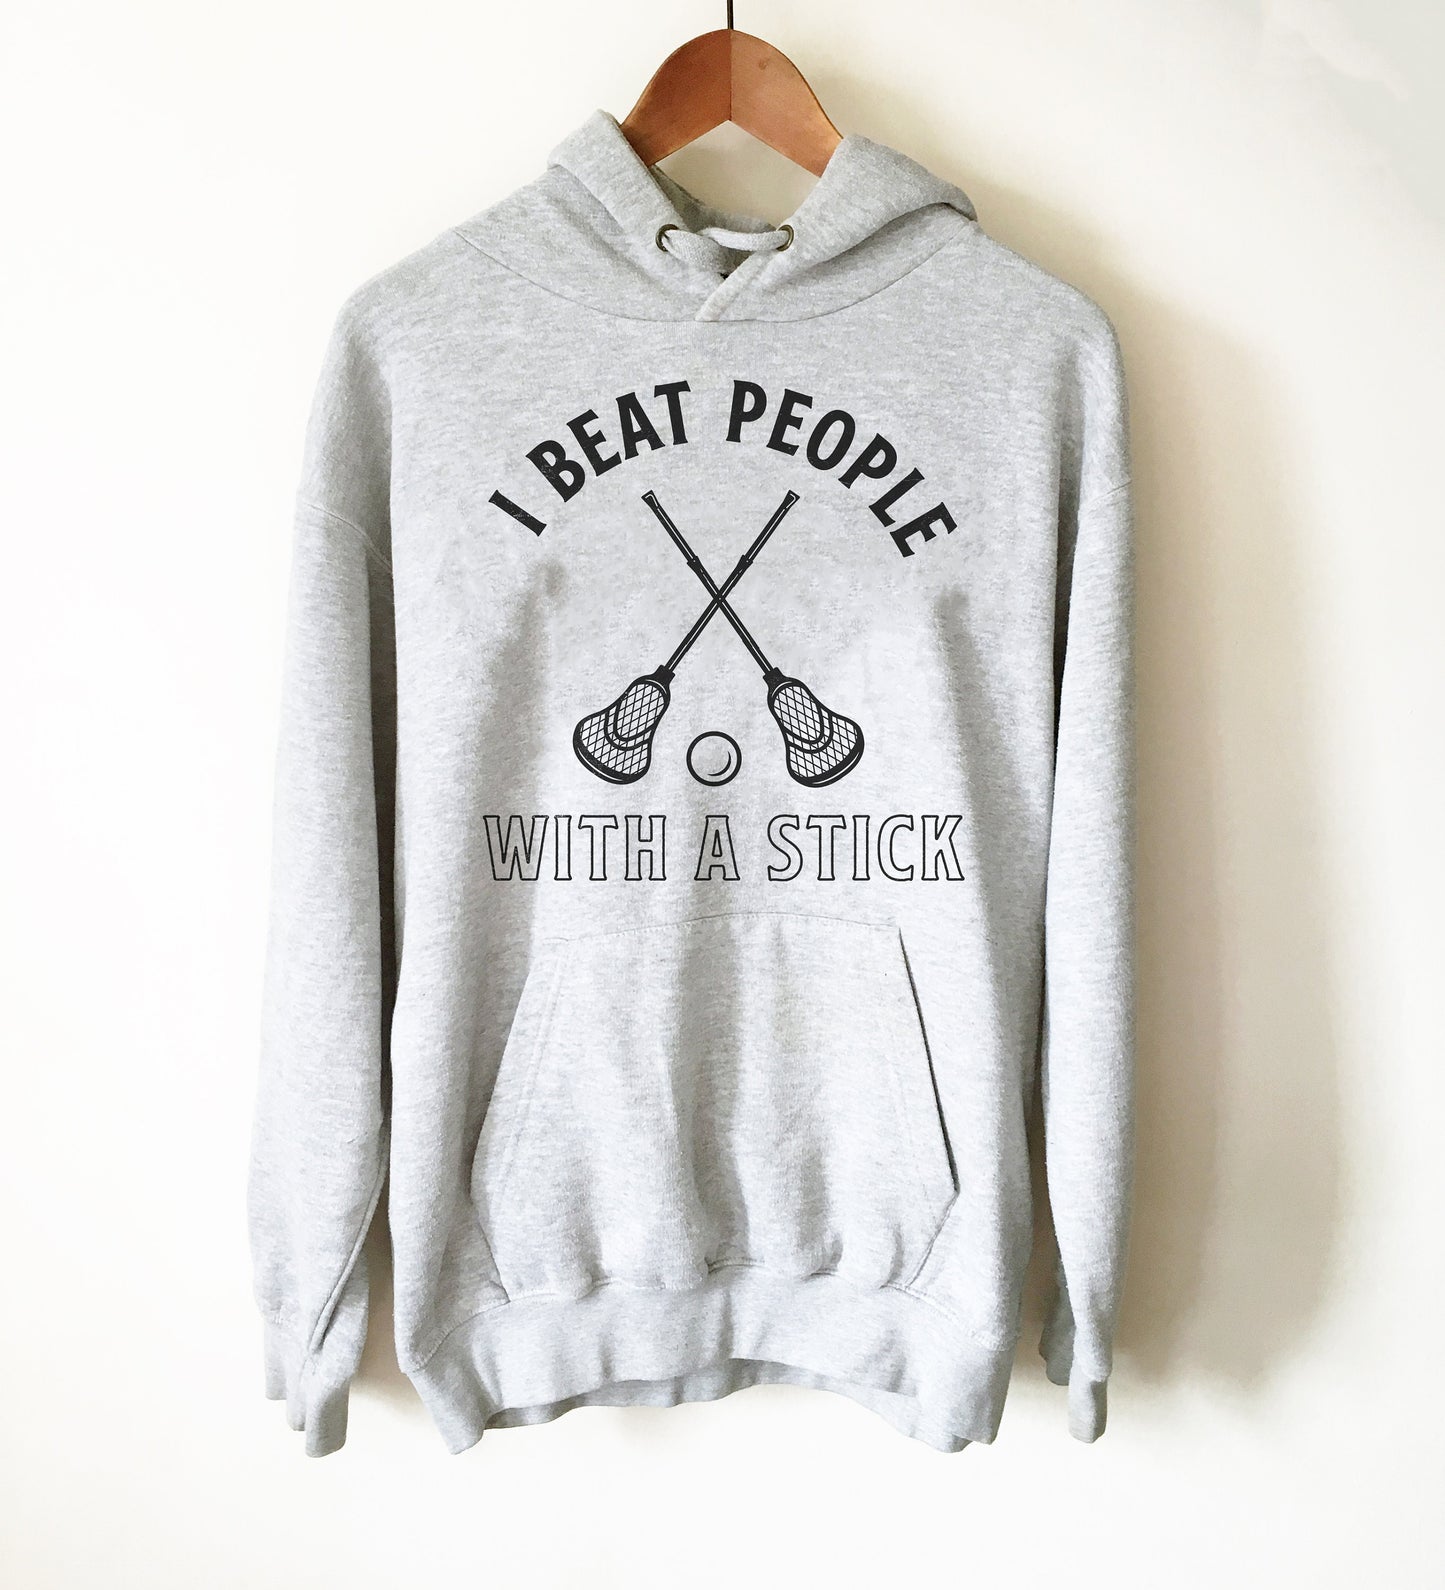 I Beat People With A Stick Hoodie - Lacrosse Shirt, Lacrosse Gift, Lacrosse Player, Lacrosse Coach, Lacrosse Team, Sports Shirt